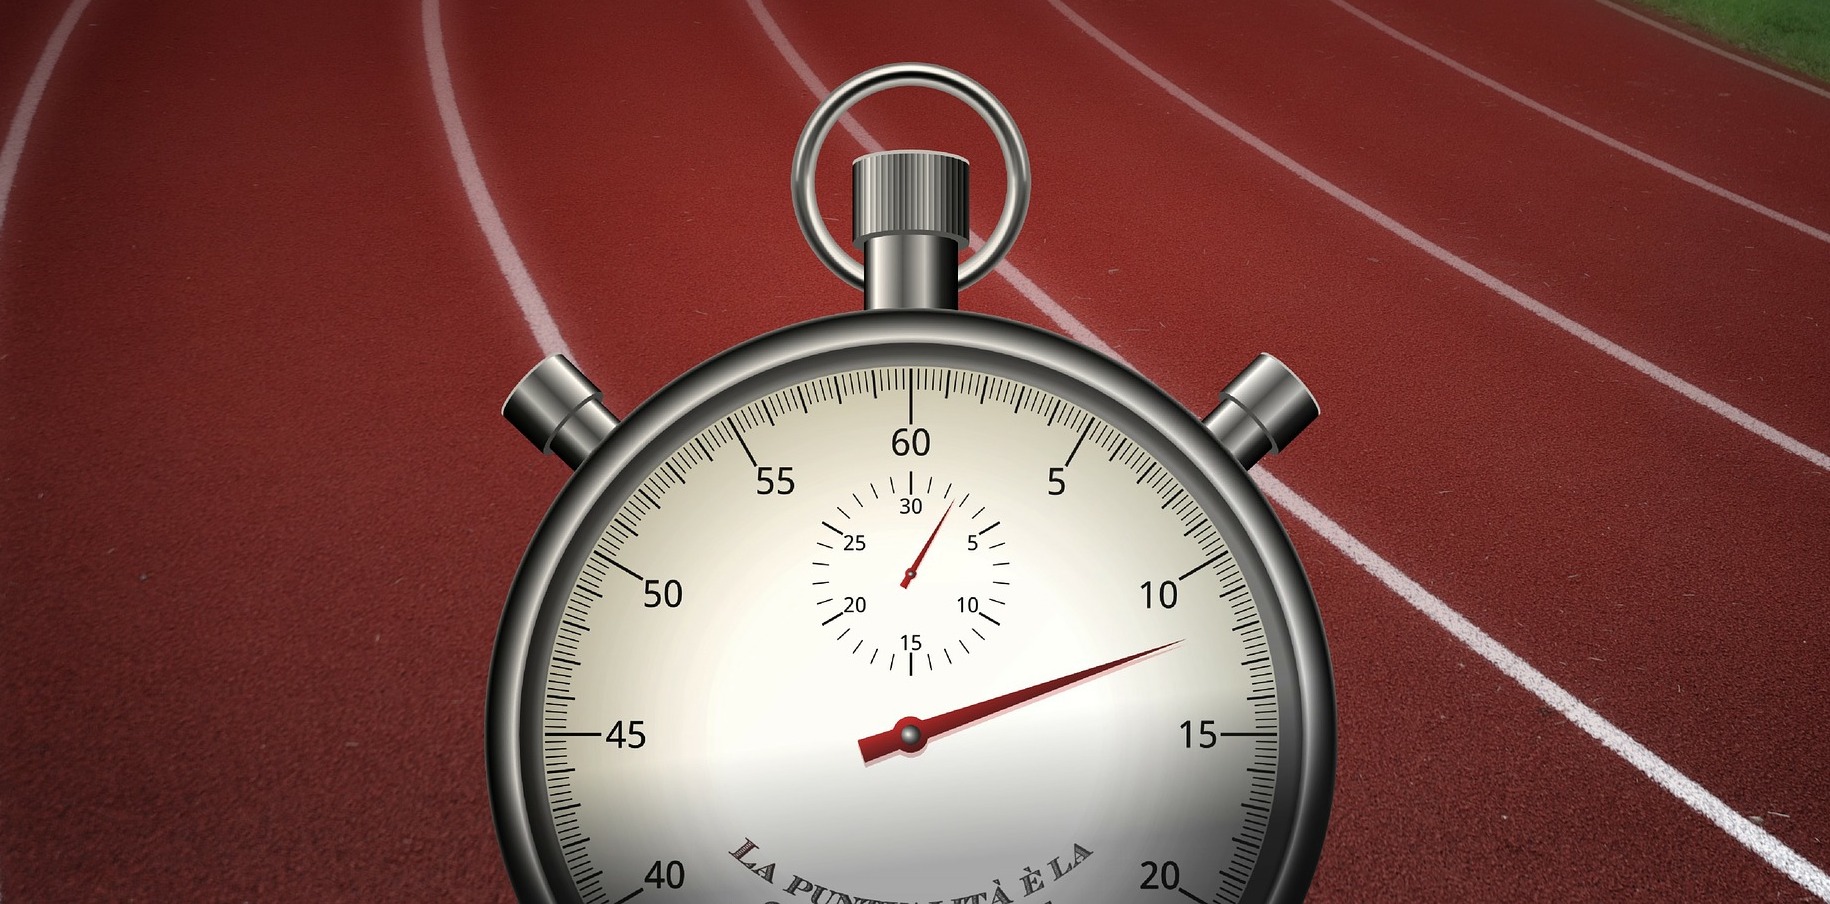 A stopwatch and an athletics track